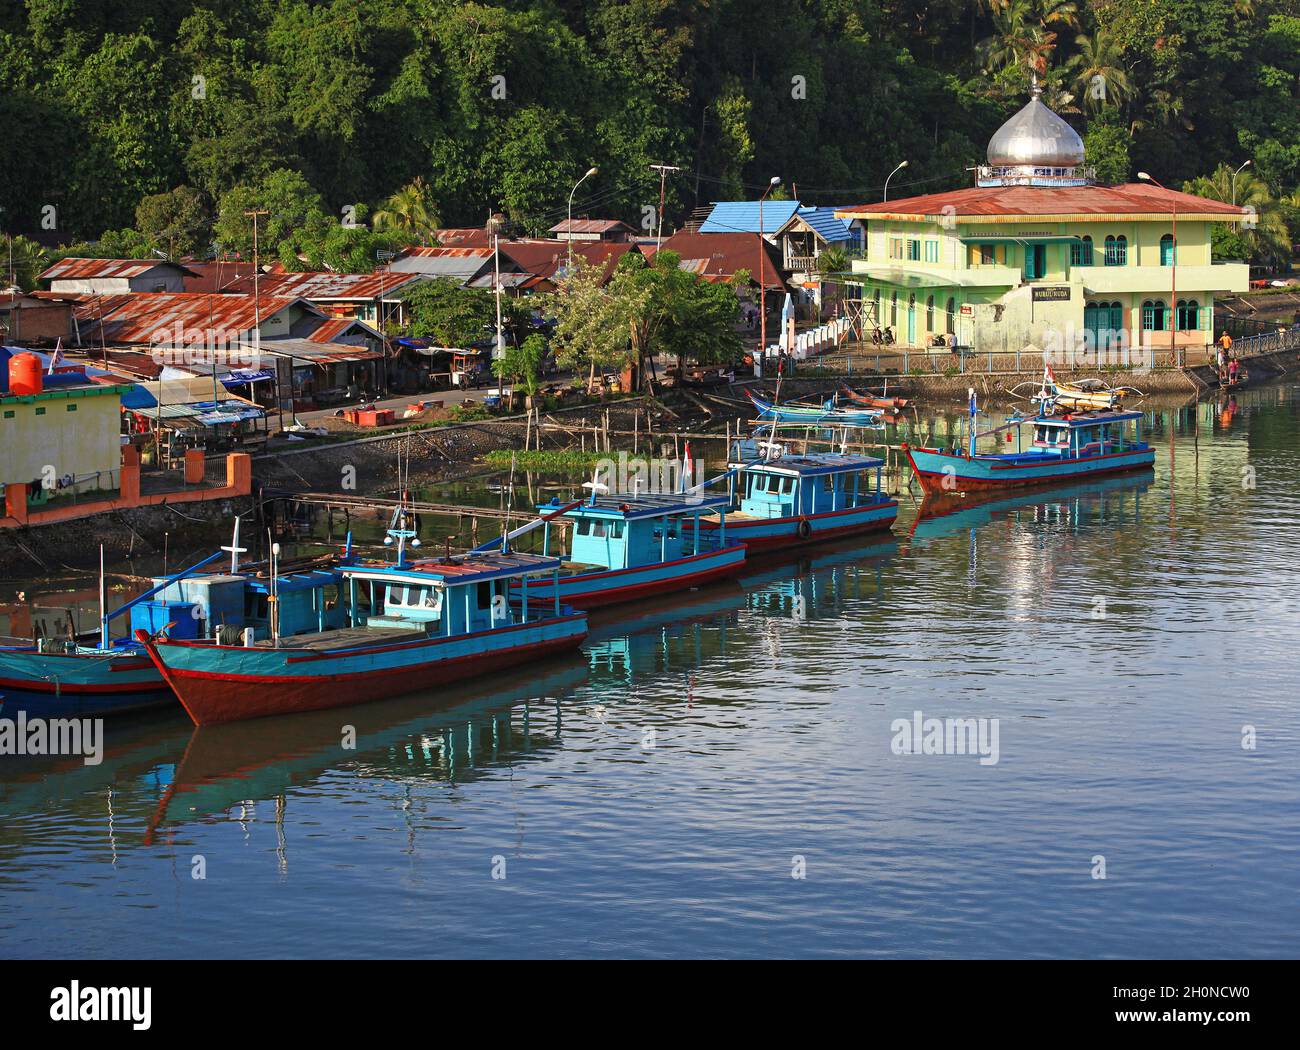 Muaro is a small old port on the Batang Arau river used by many small wooden fishing boats in the old town part of Padang, West Sumatra, Indonesia. Stock Photo